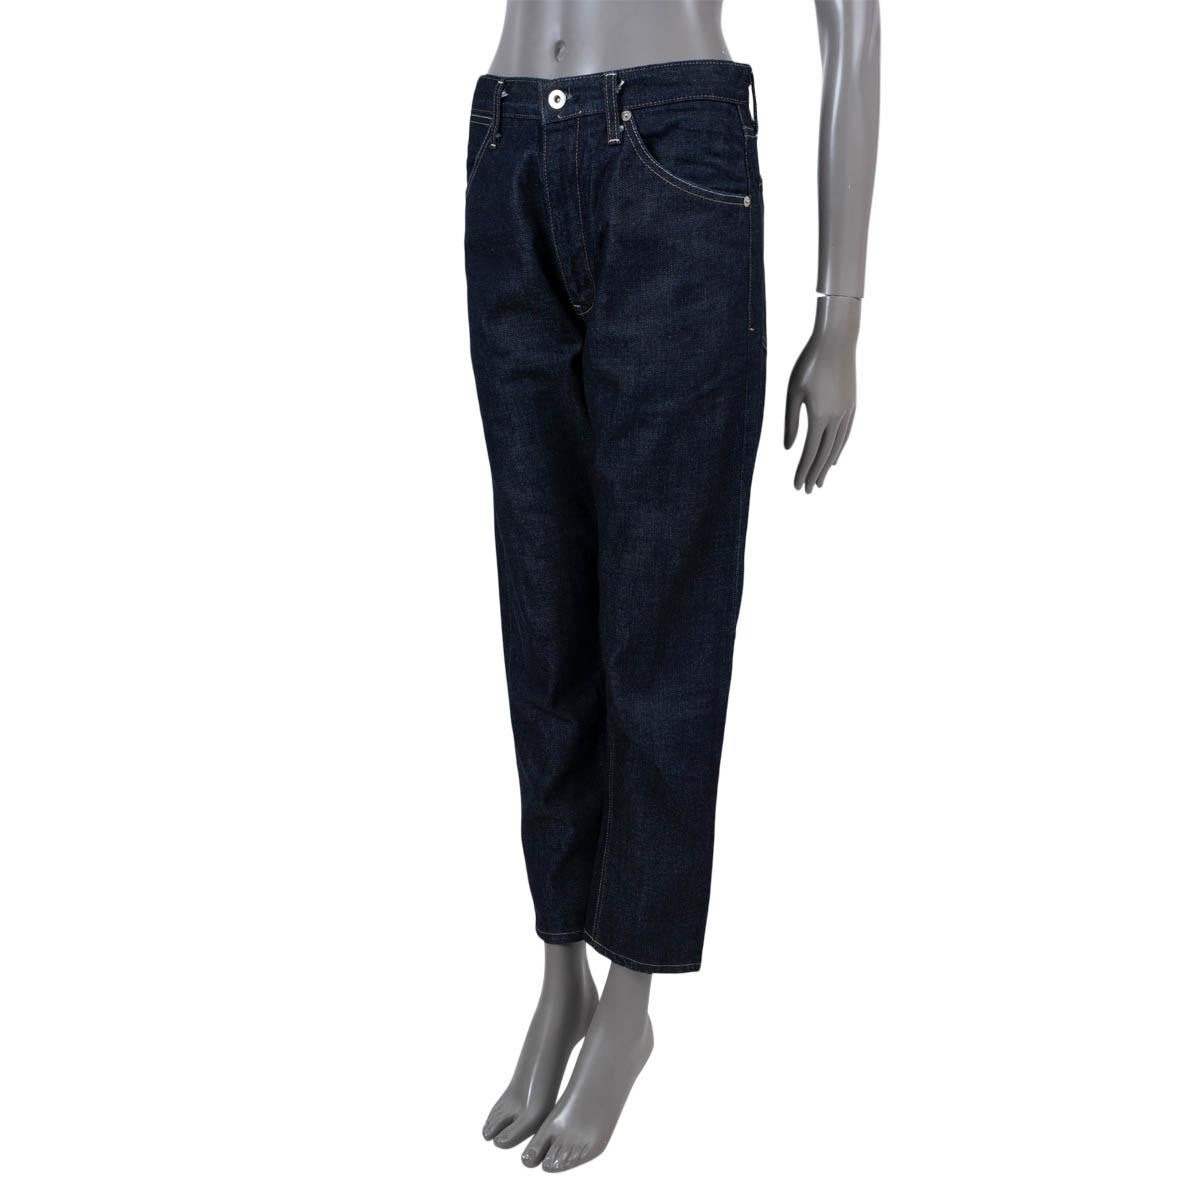 100% authentic Jil Sander+ high-rise straight-leg jeans in indigo cotton (100%). Features slit pockets on the front, patch pockets in the back and belt loops. Open with a zipper and button on the front. Has been worn and is in excellent condition.